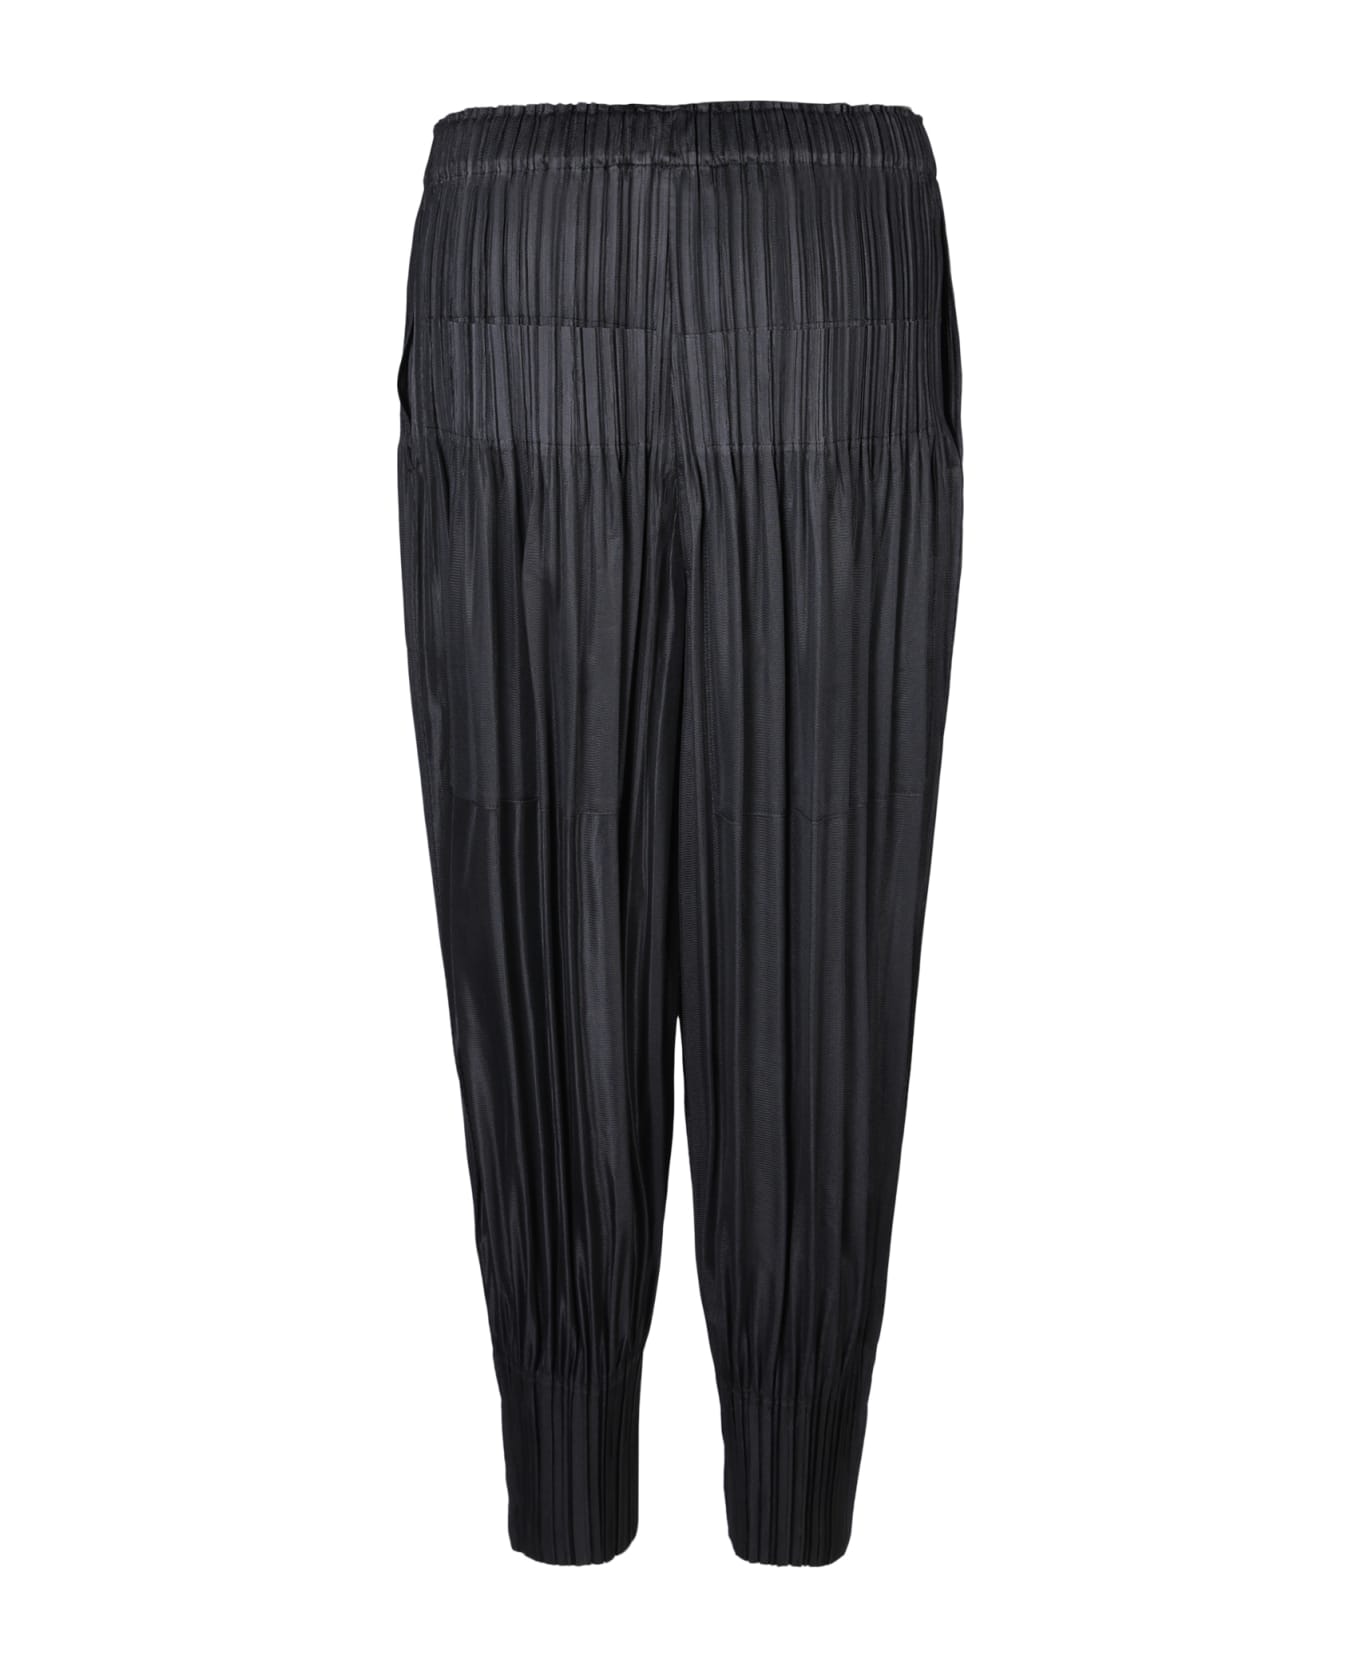 Issey Miyake Fluffy Pleats Please Black Trousers - Black ボトムス